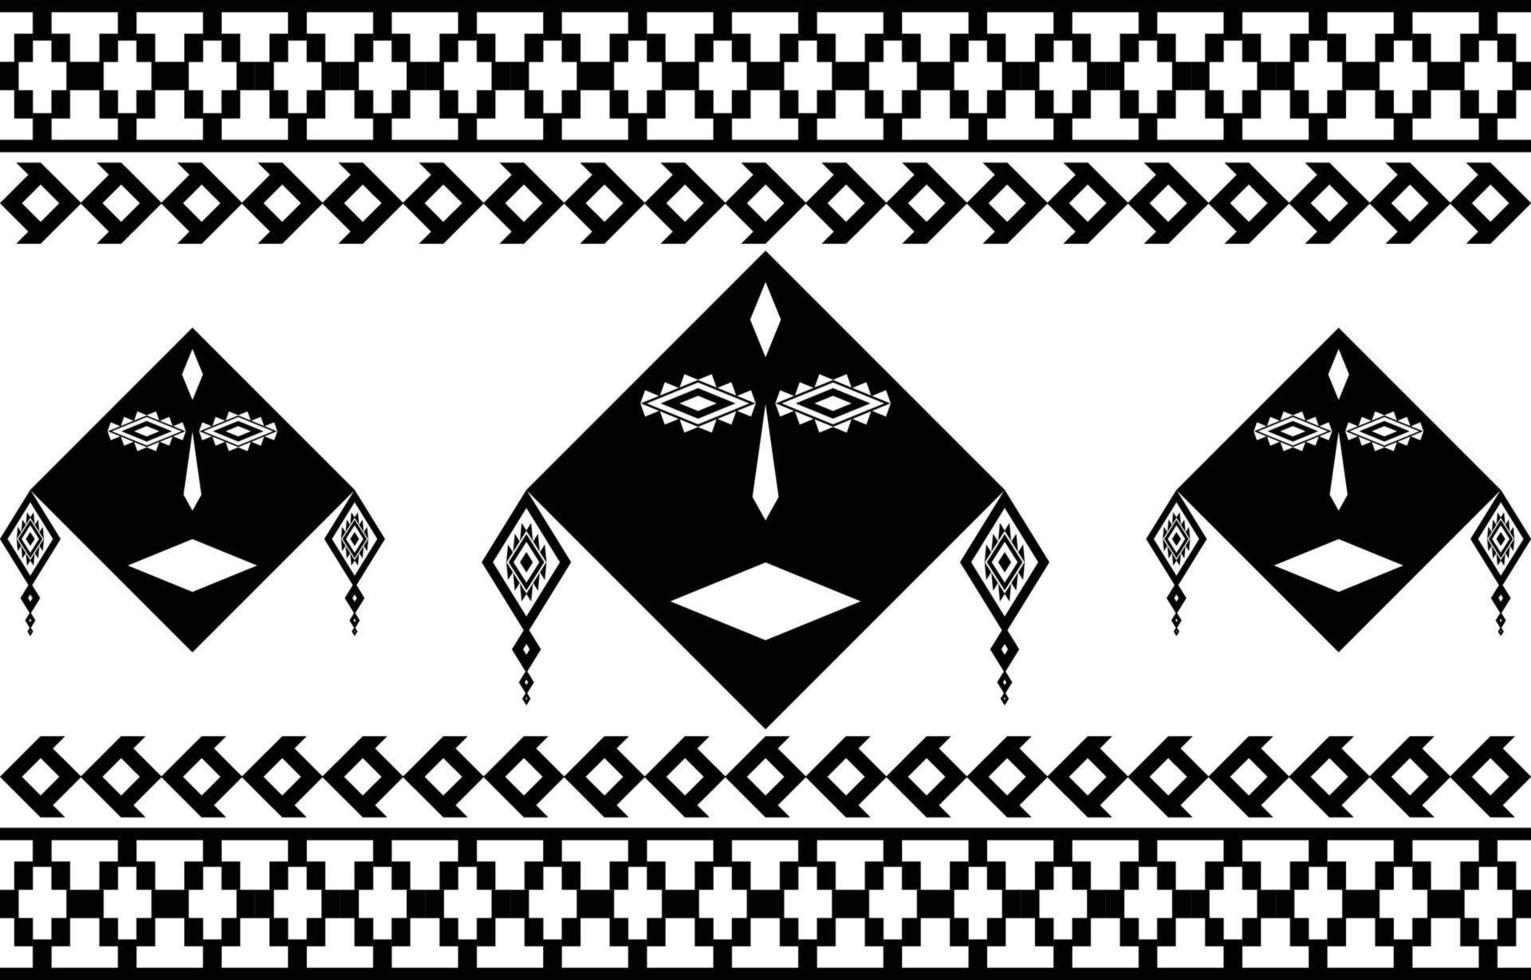 Tribal face Black and white Abstract ethnic geometric pattern design for background or wallpaper.vector illustration To print fabric patterns, rugs, shirts, costumes, turban, hats, curtains. vector